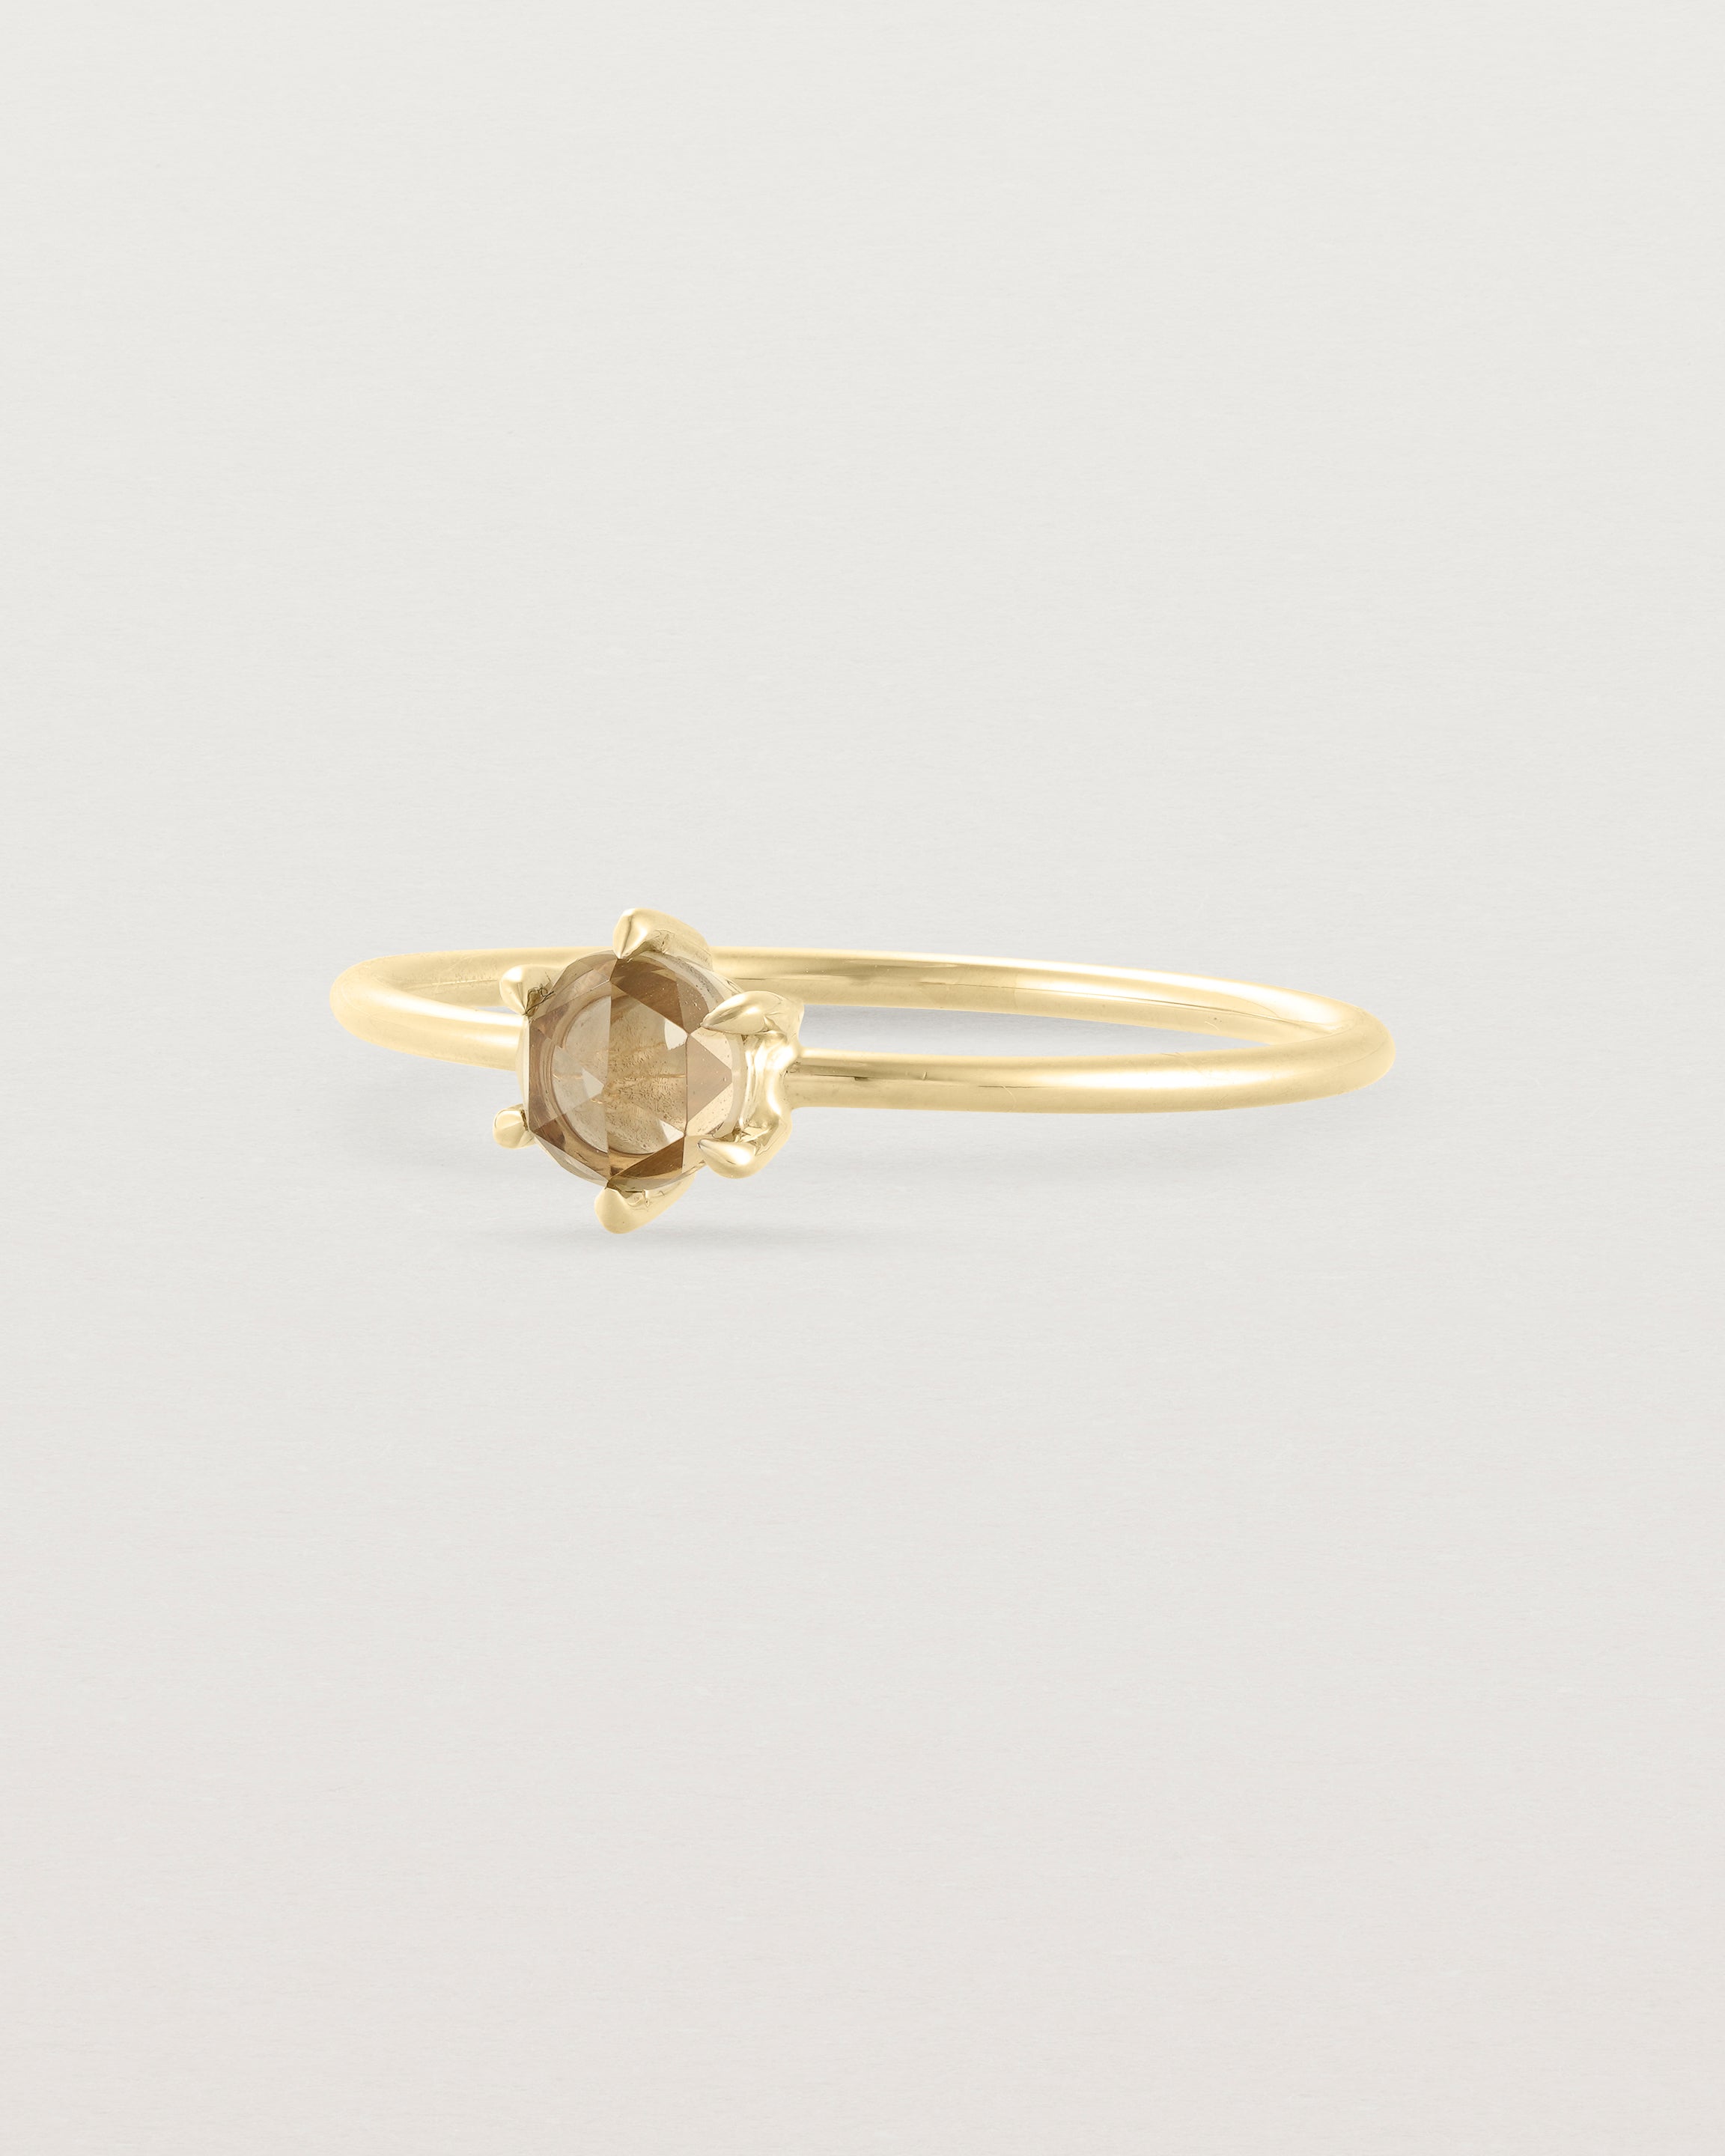 Angled view of the Tiny Rose Cut Ring | Honey Quartz | Yellow Gold.